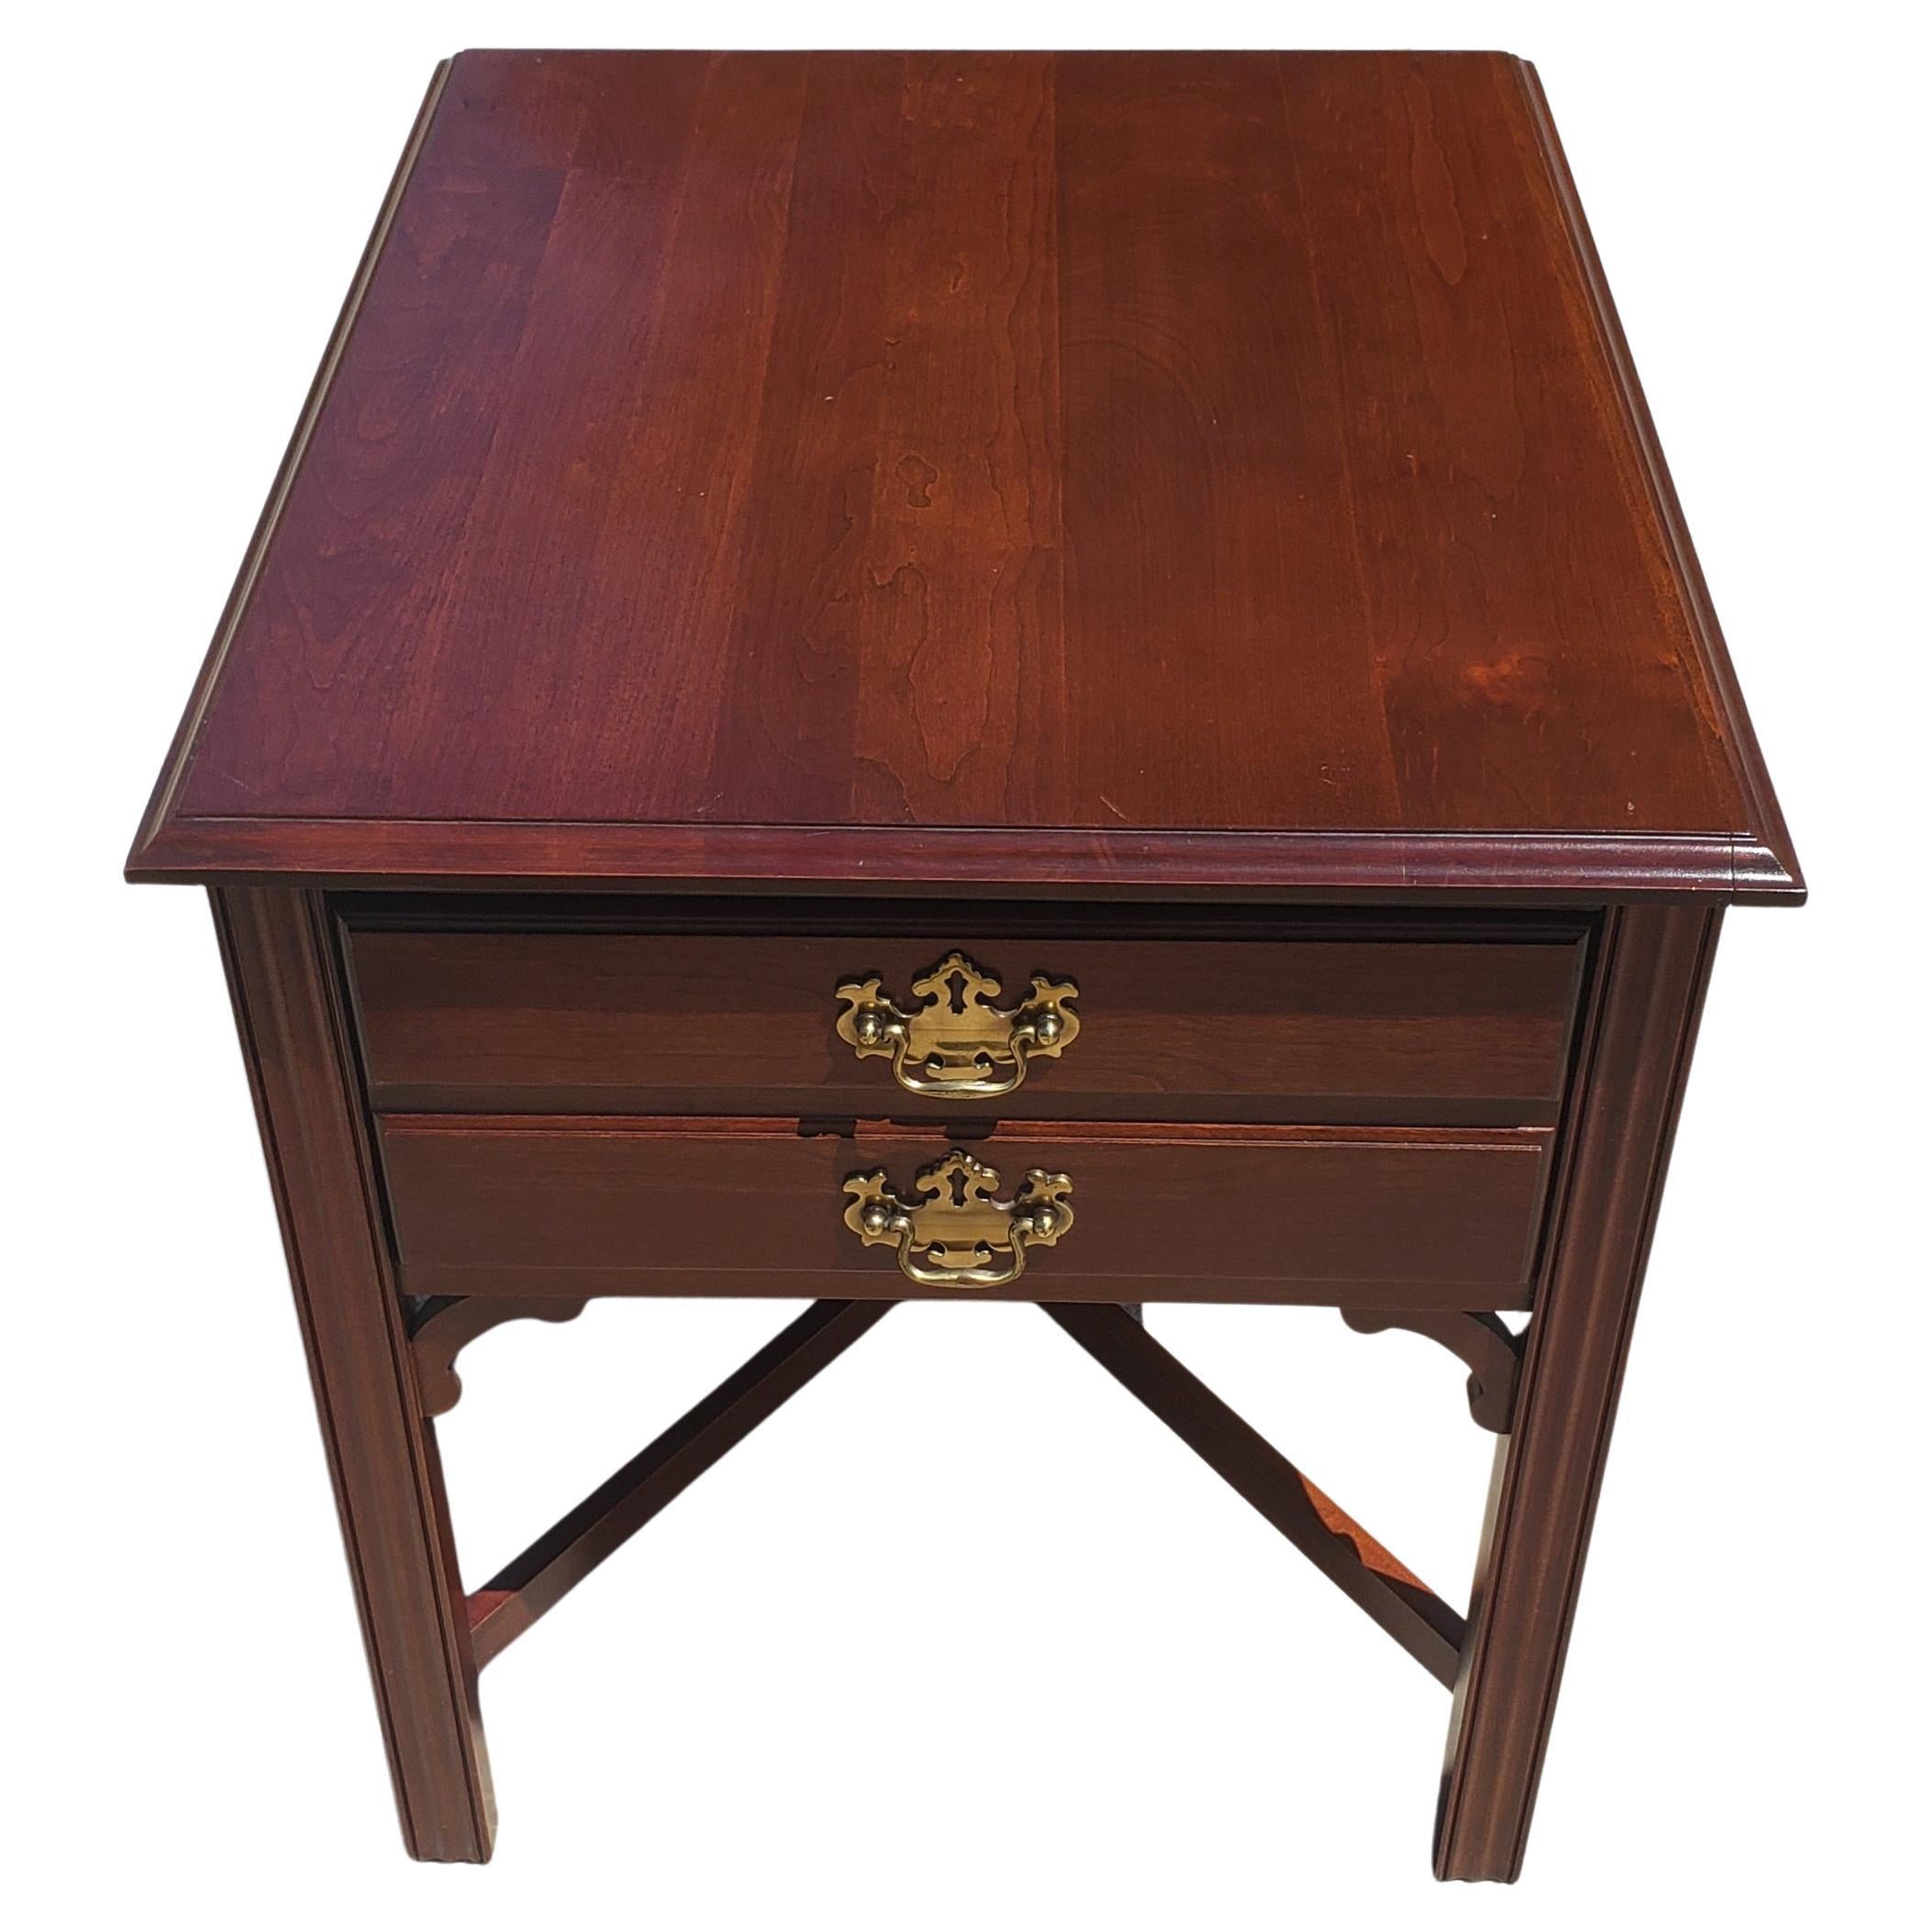 Beautiful Pennsylvania House Chippendale side table in solid cherry wood. 
Features one large and deep dovetailed drawer with two brass Chippendale handles. 
Good vintage condition. Measures 22